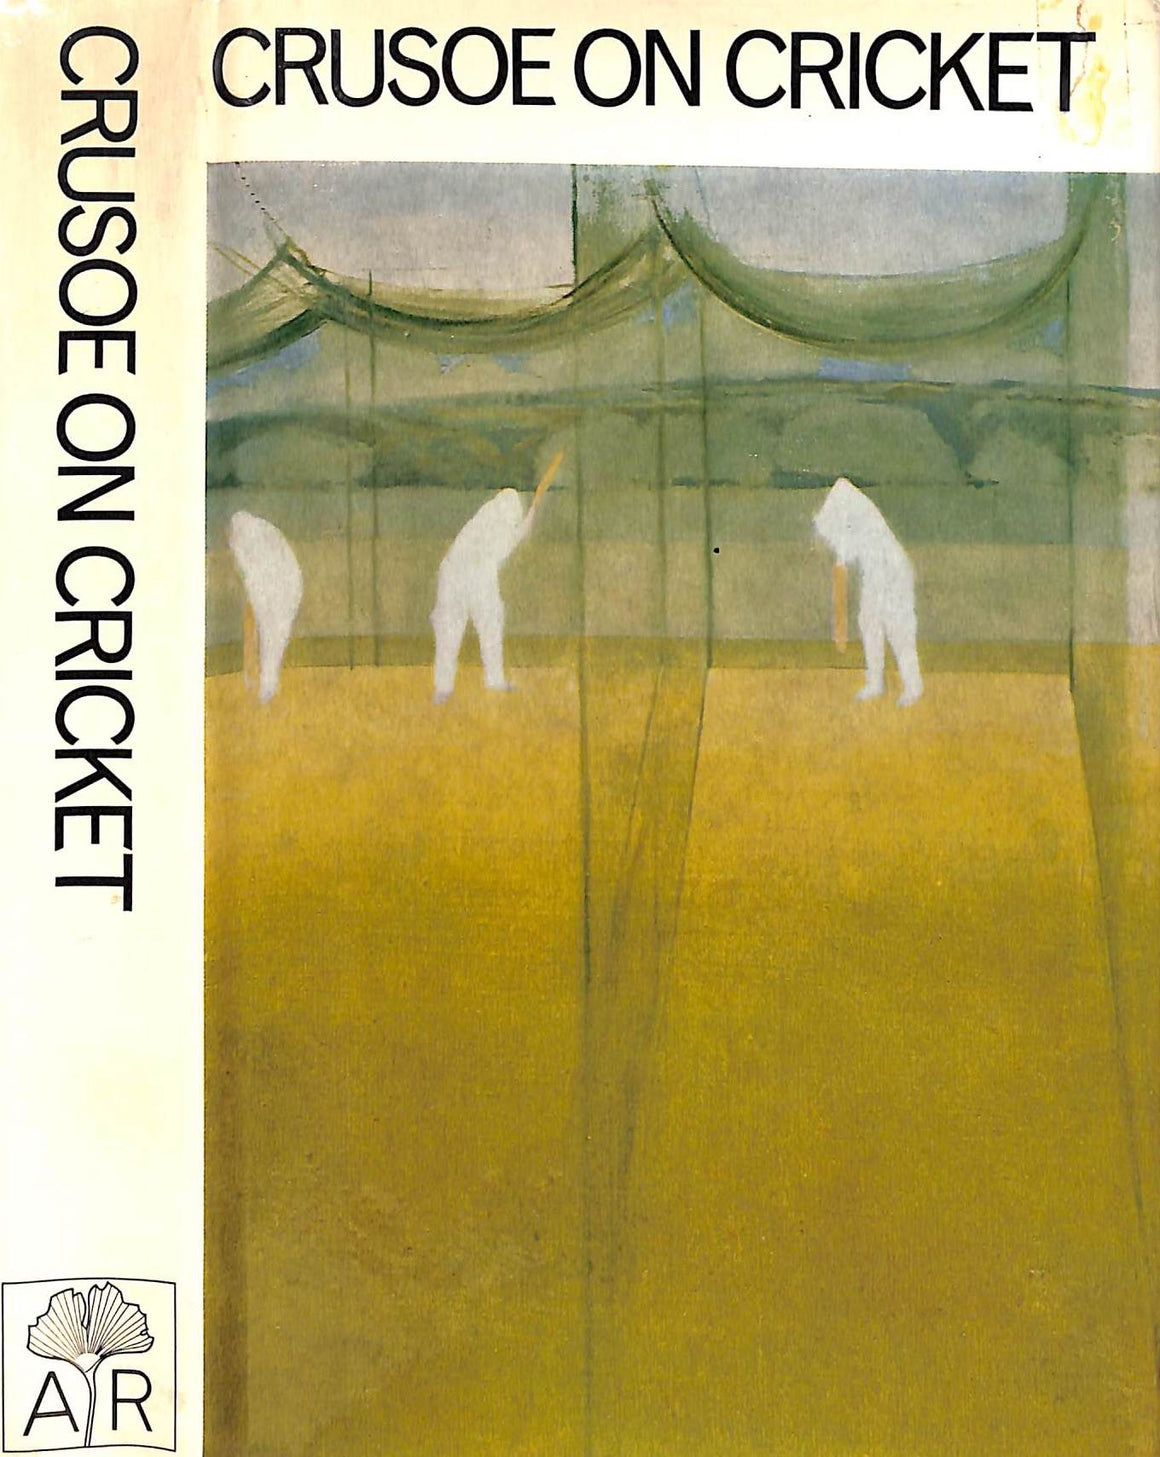 "Crusoe On Cricket The Cricket Writings Of R.C. Robertson-Glasgow" 1966 ROBERTSON-GLASGOW, R. C.